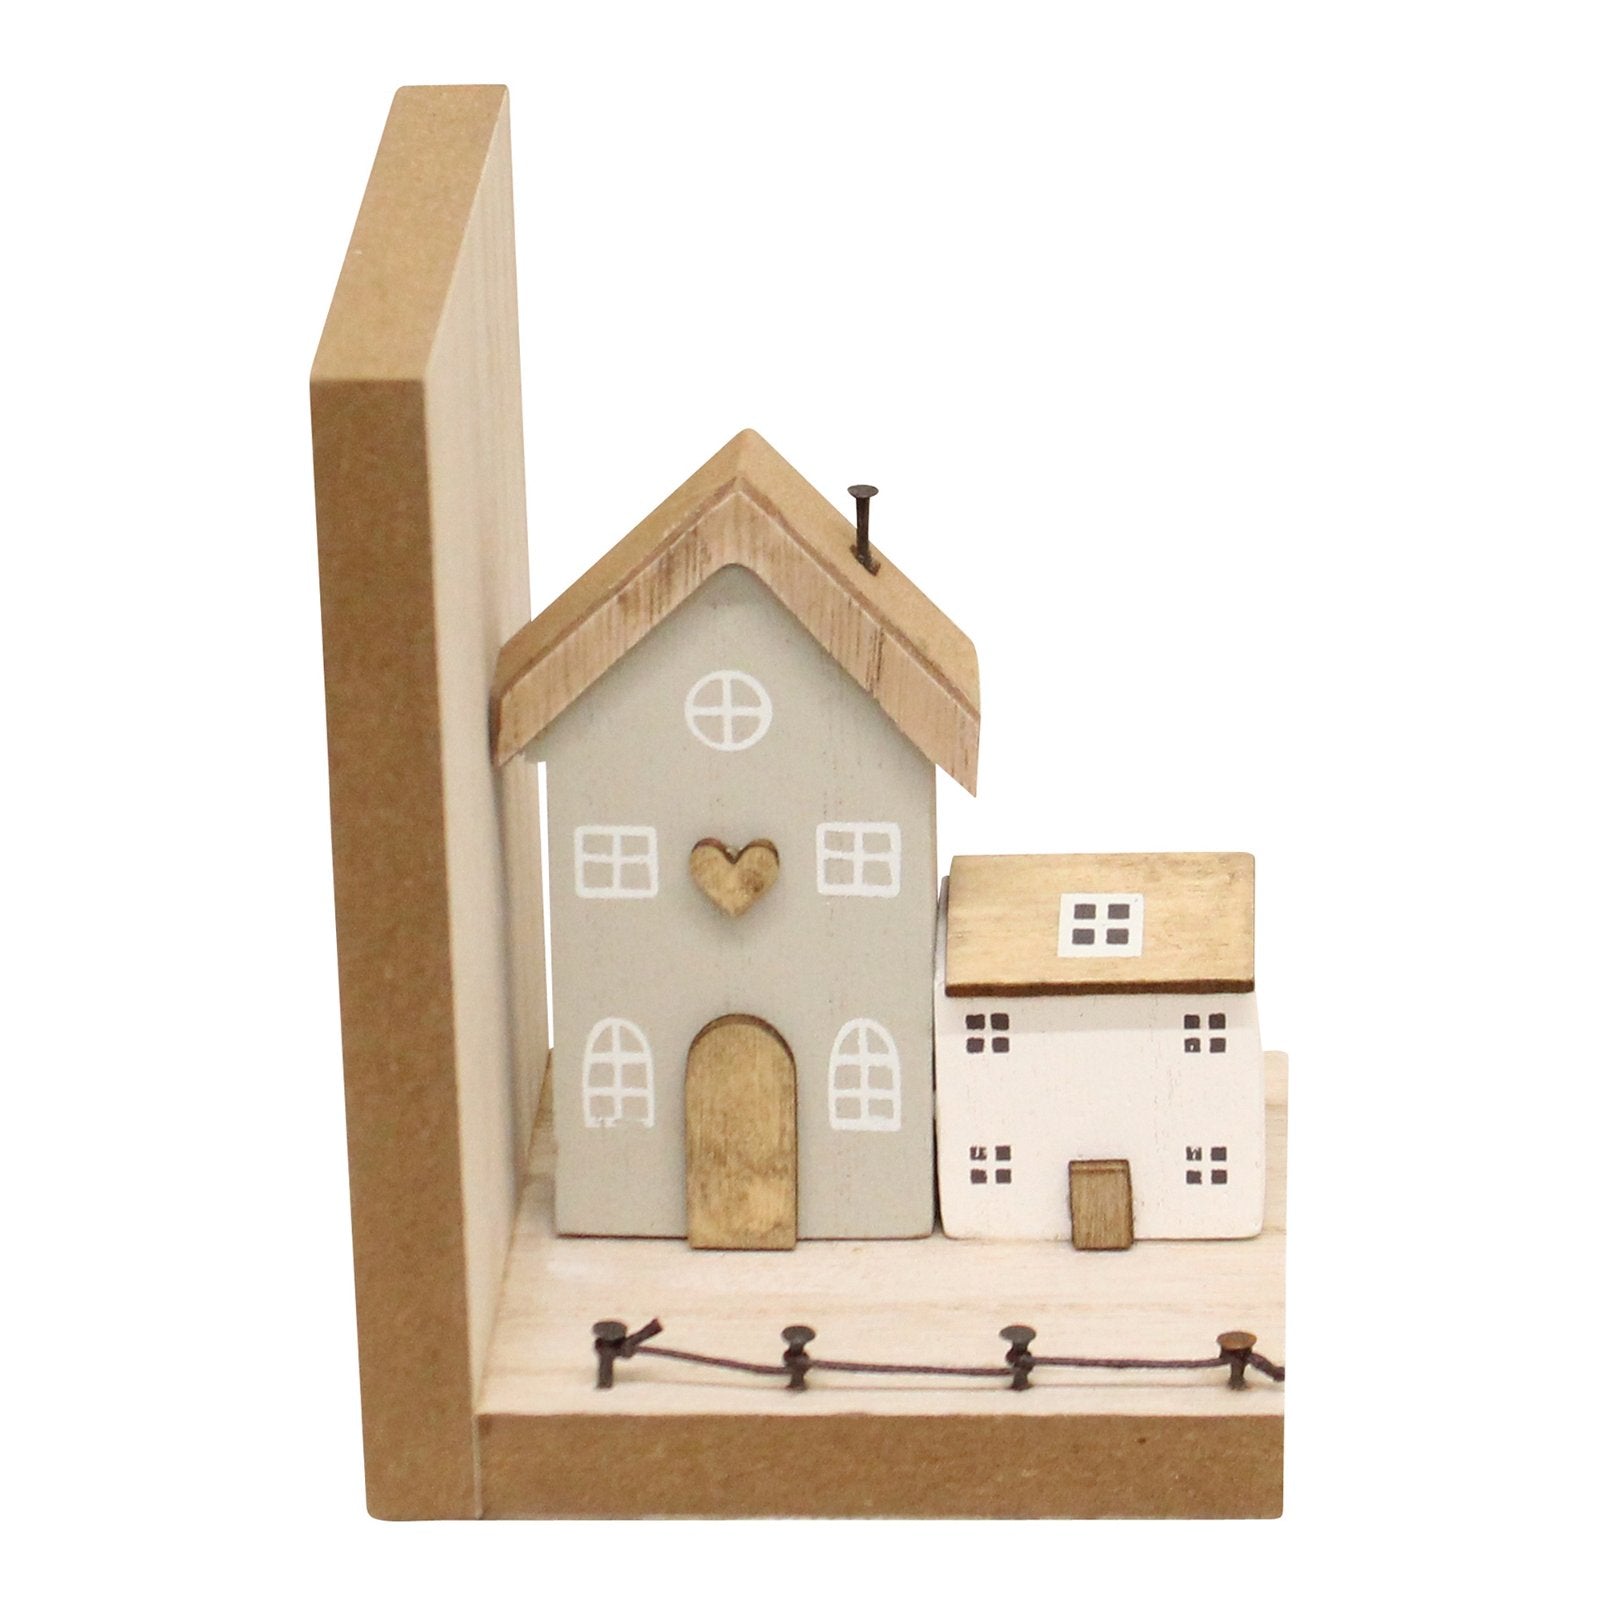 Pair of Bookends, Wooden Houses Design